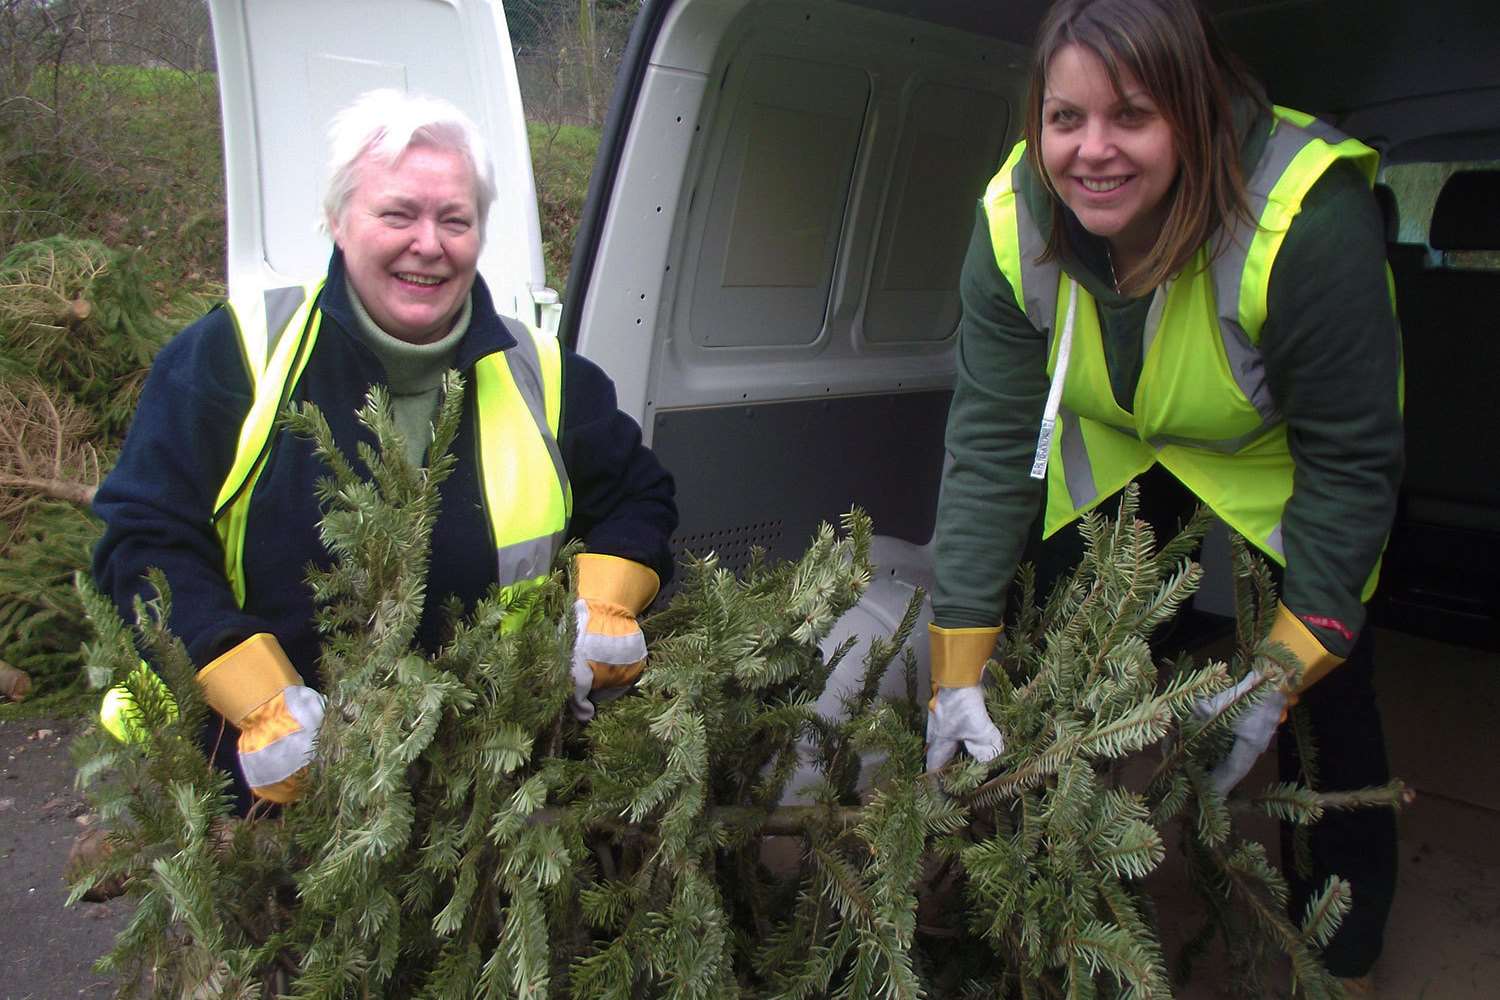 Pilgrims hospice volunteers help out with the treecycling campaign